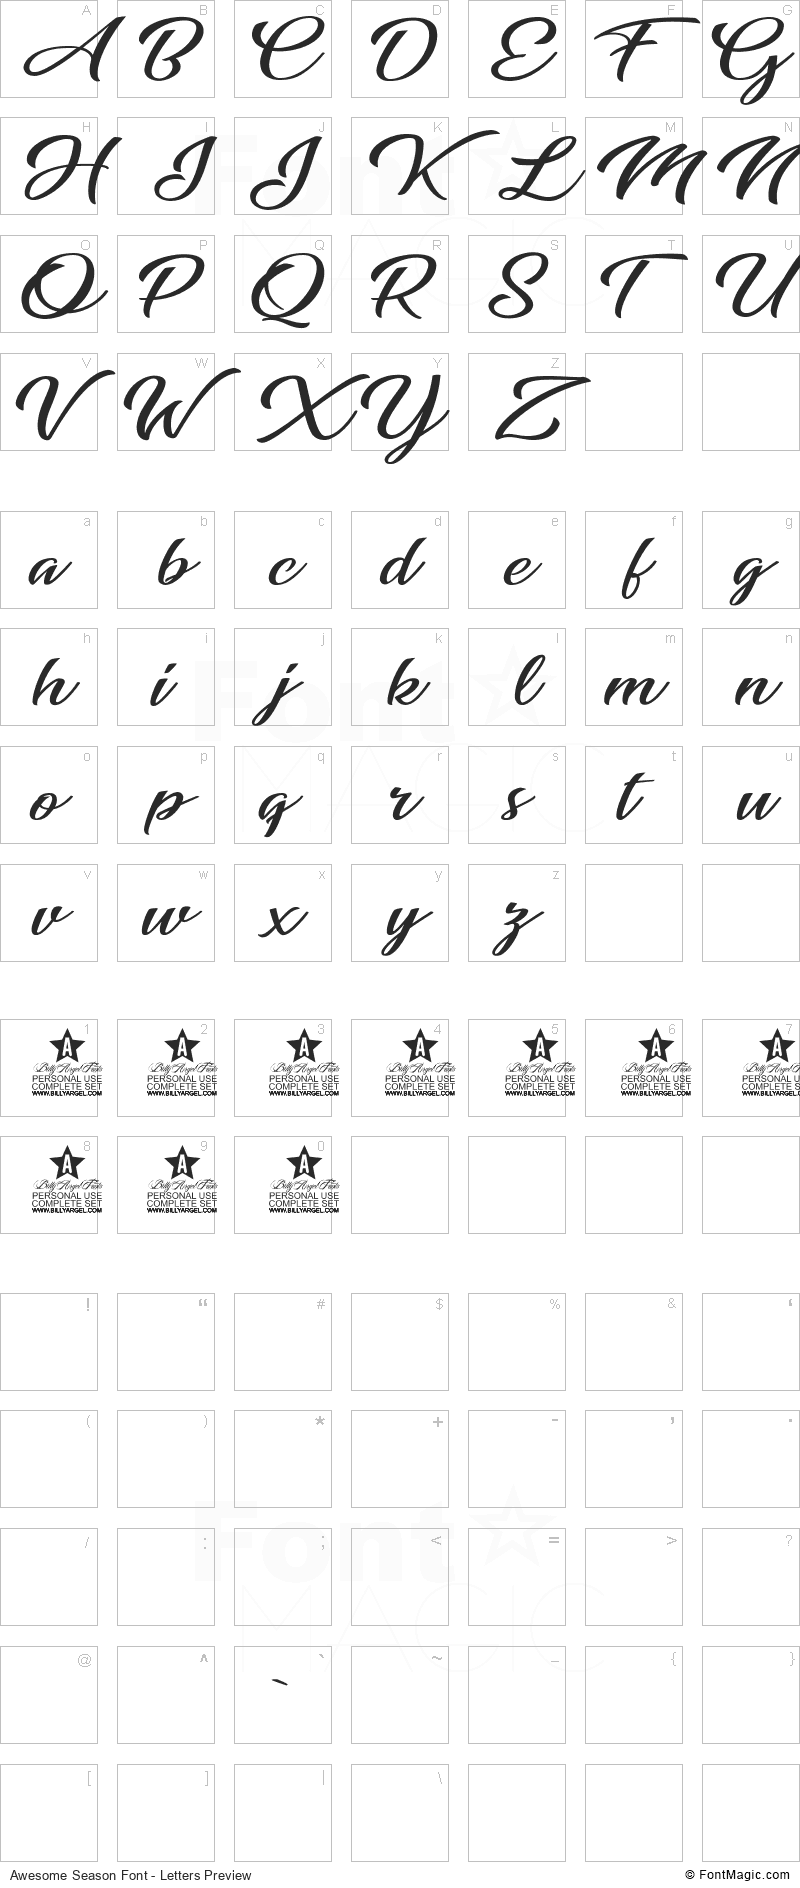 Awesome Season Font - All Latters Preview Chart